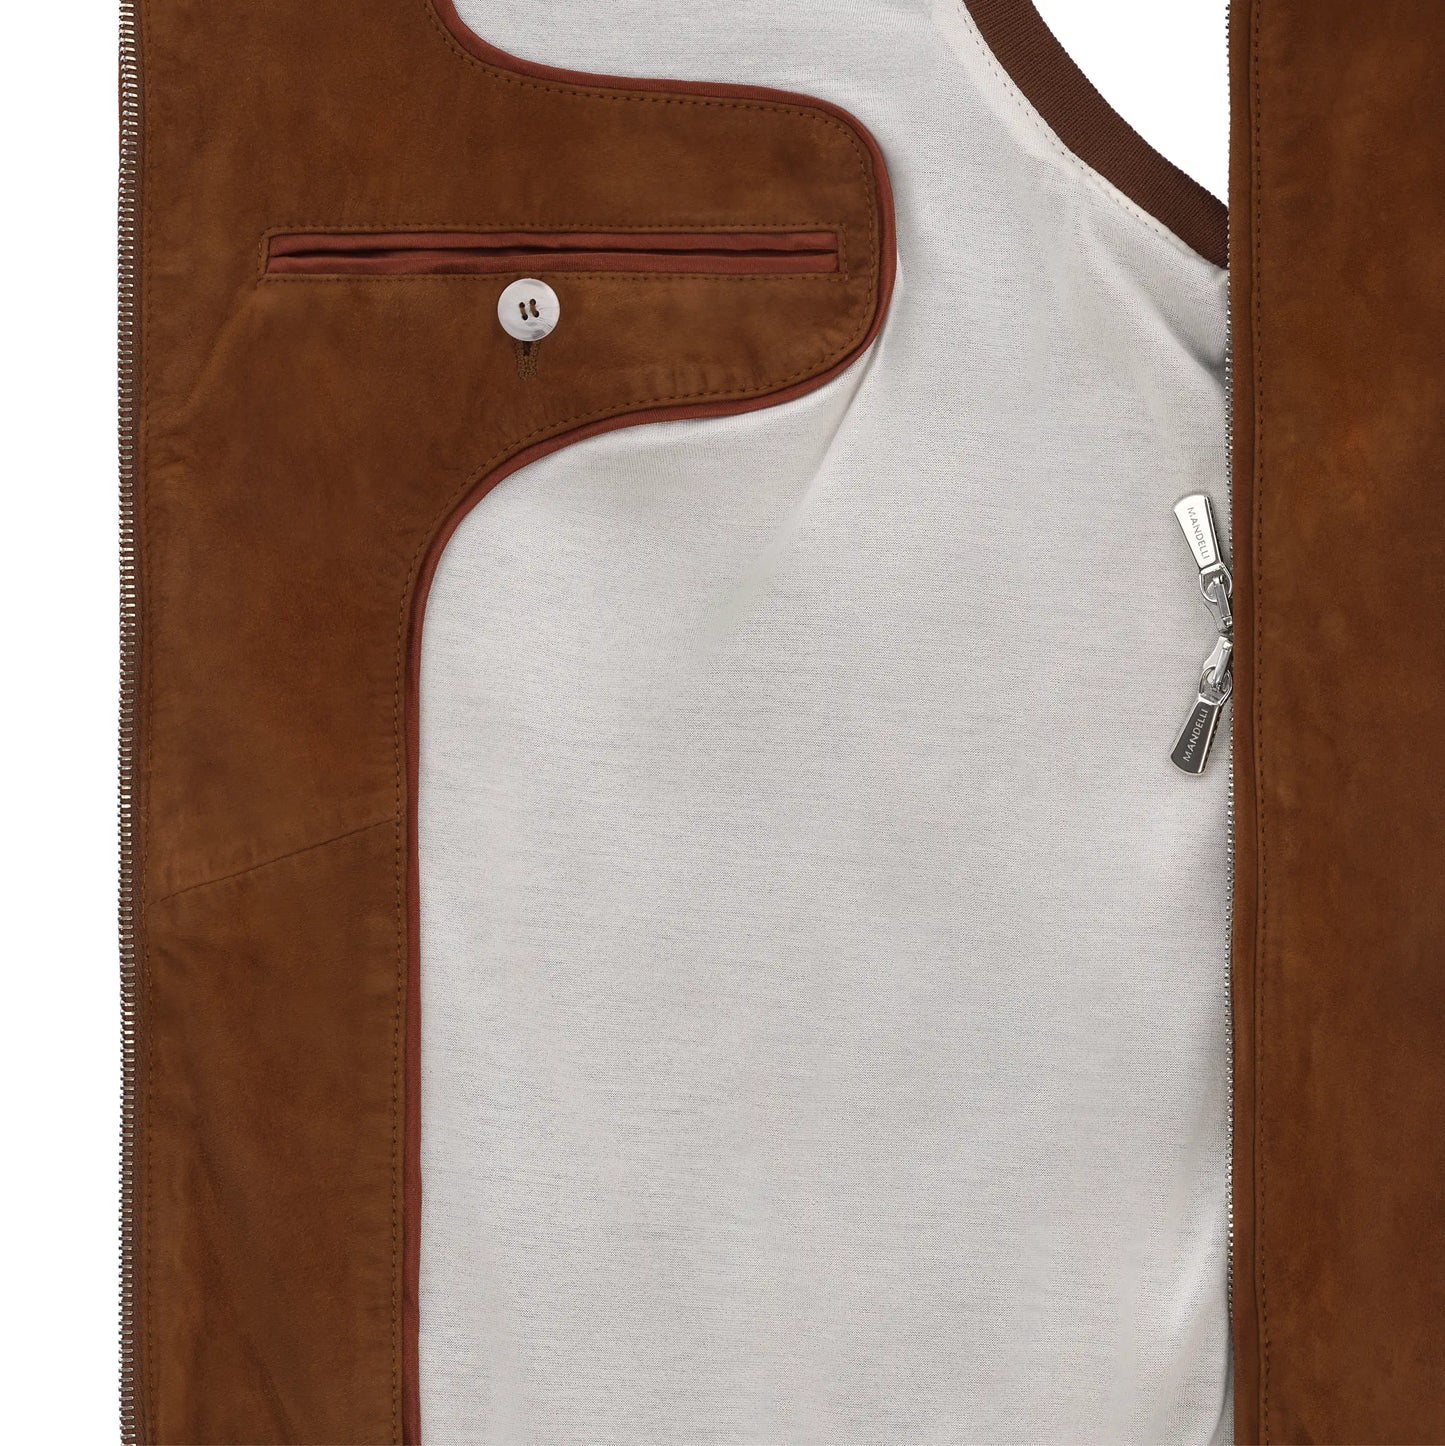 Hooded Leather Vest in Gingerbread